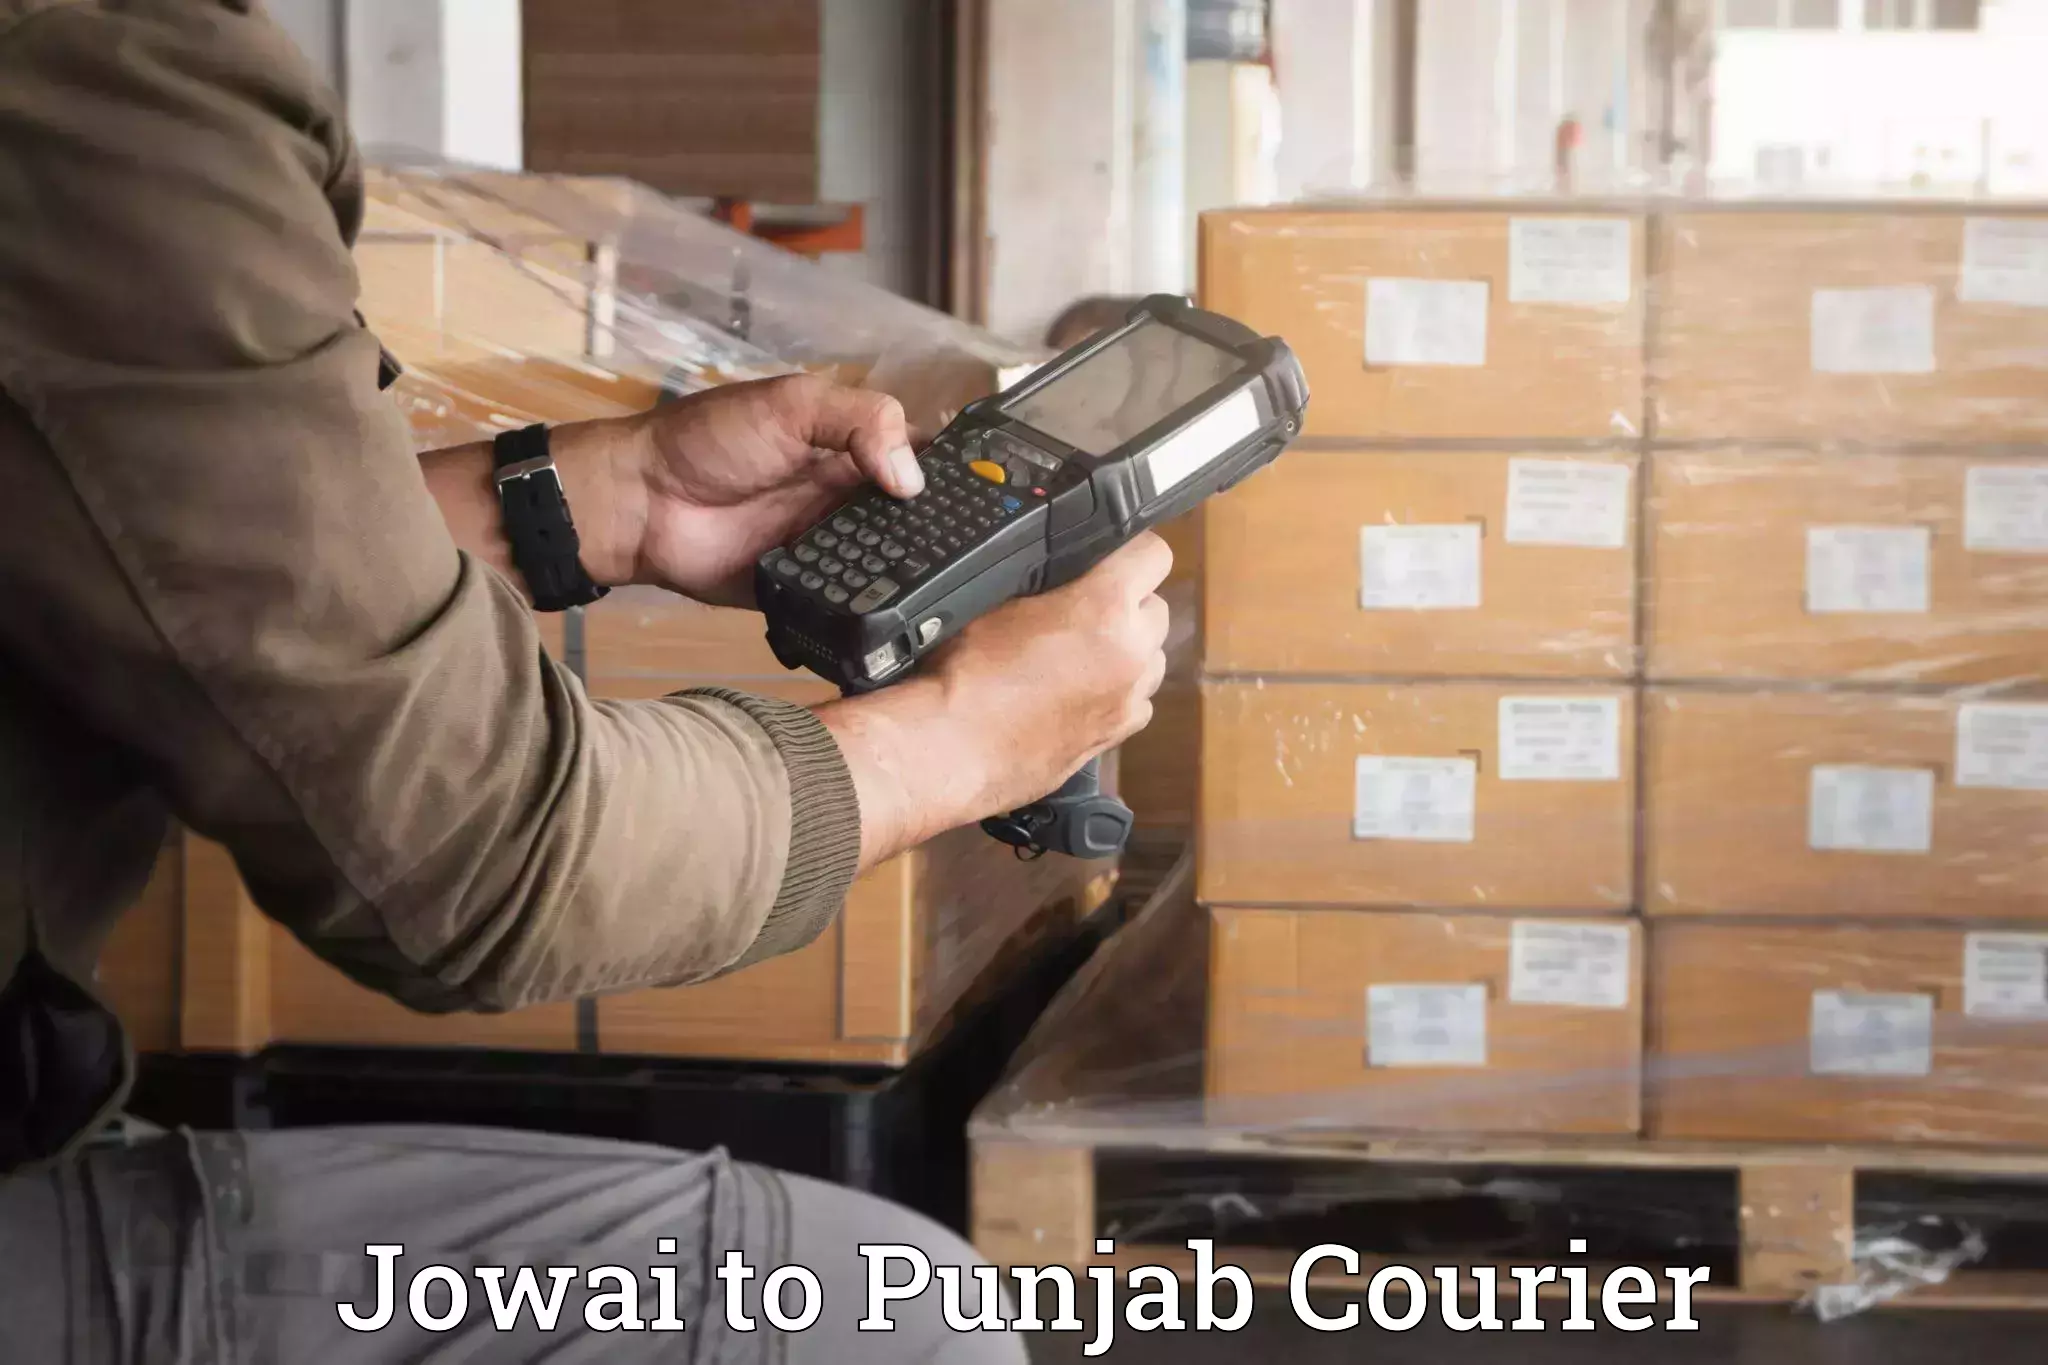 Reliable relocation services Jowai to Mohali